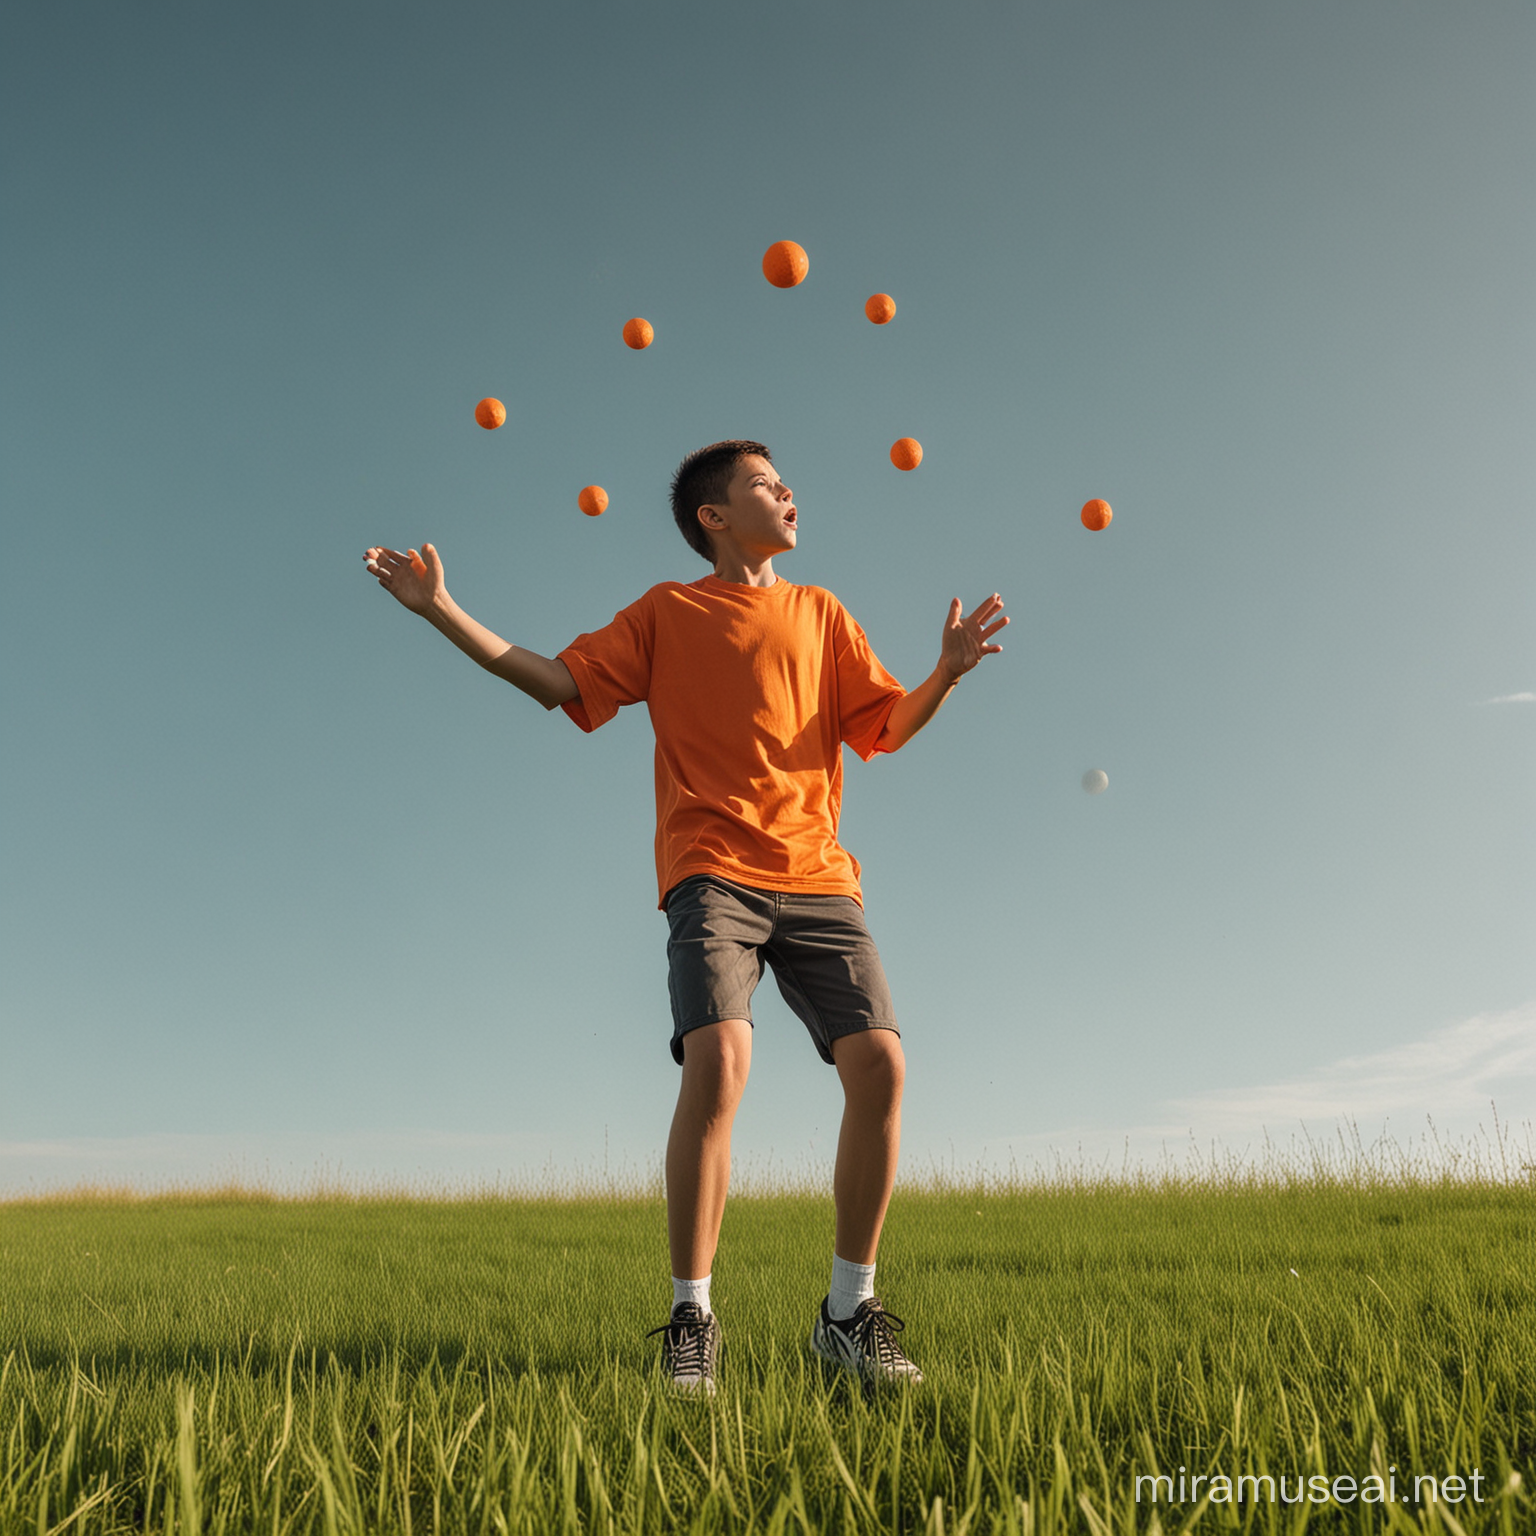 Talented Boy Juggling Five Colorful Balls in a Lush Green Meadow